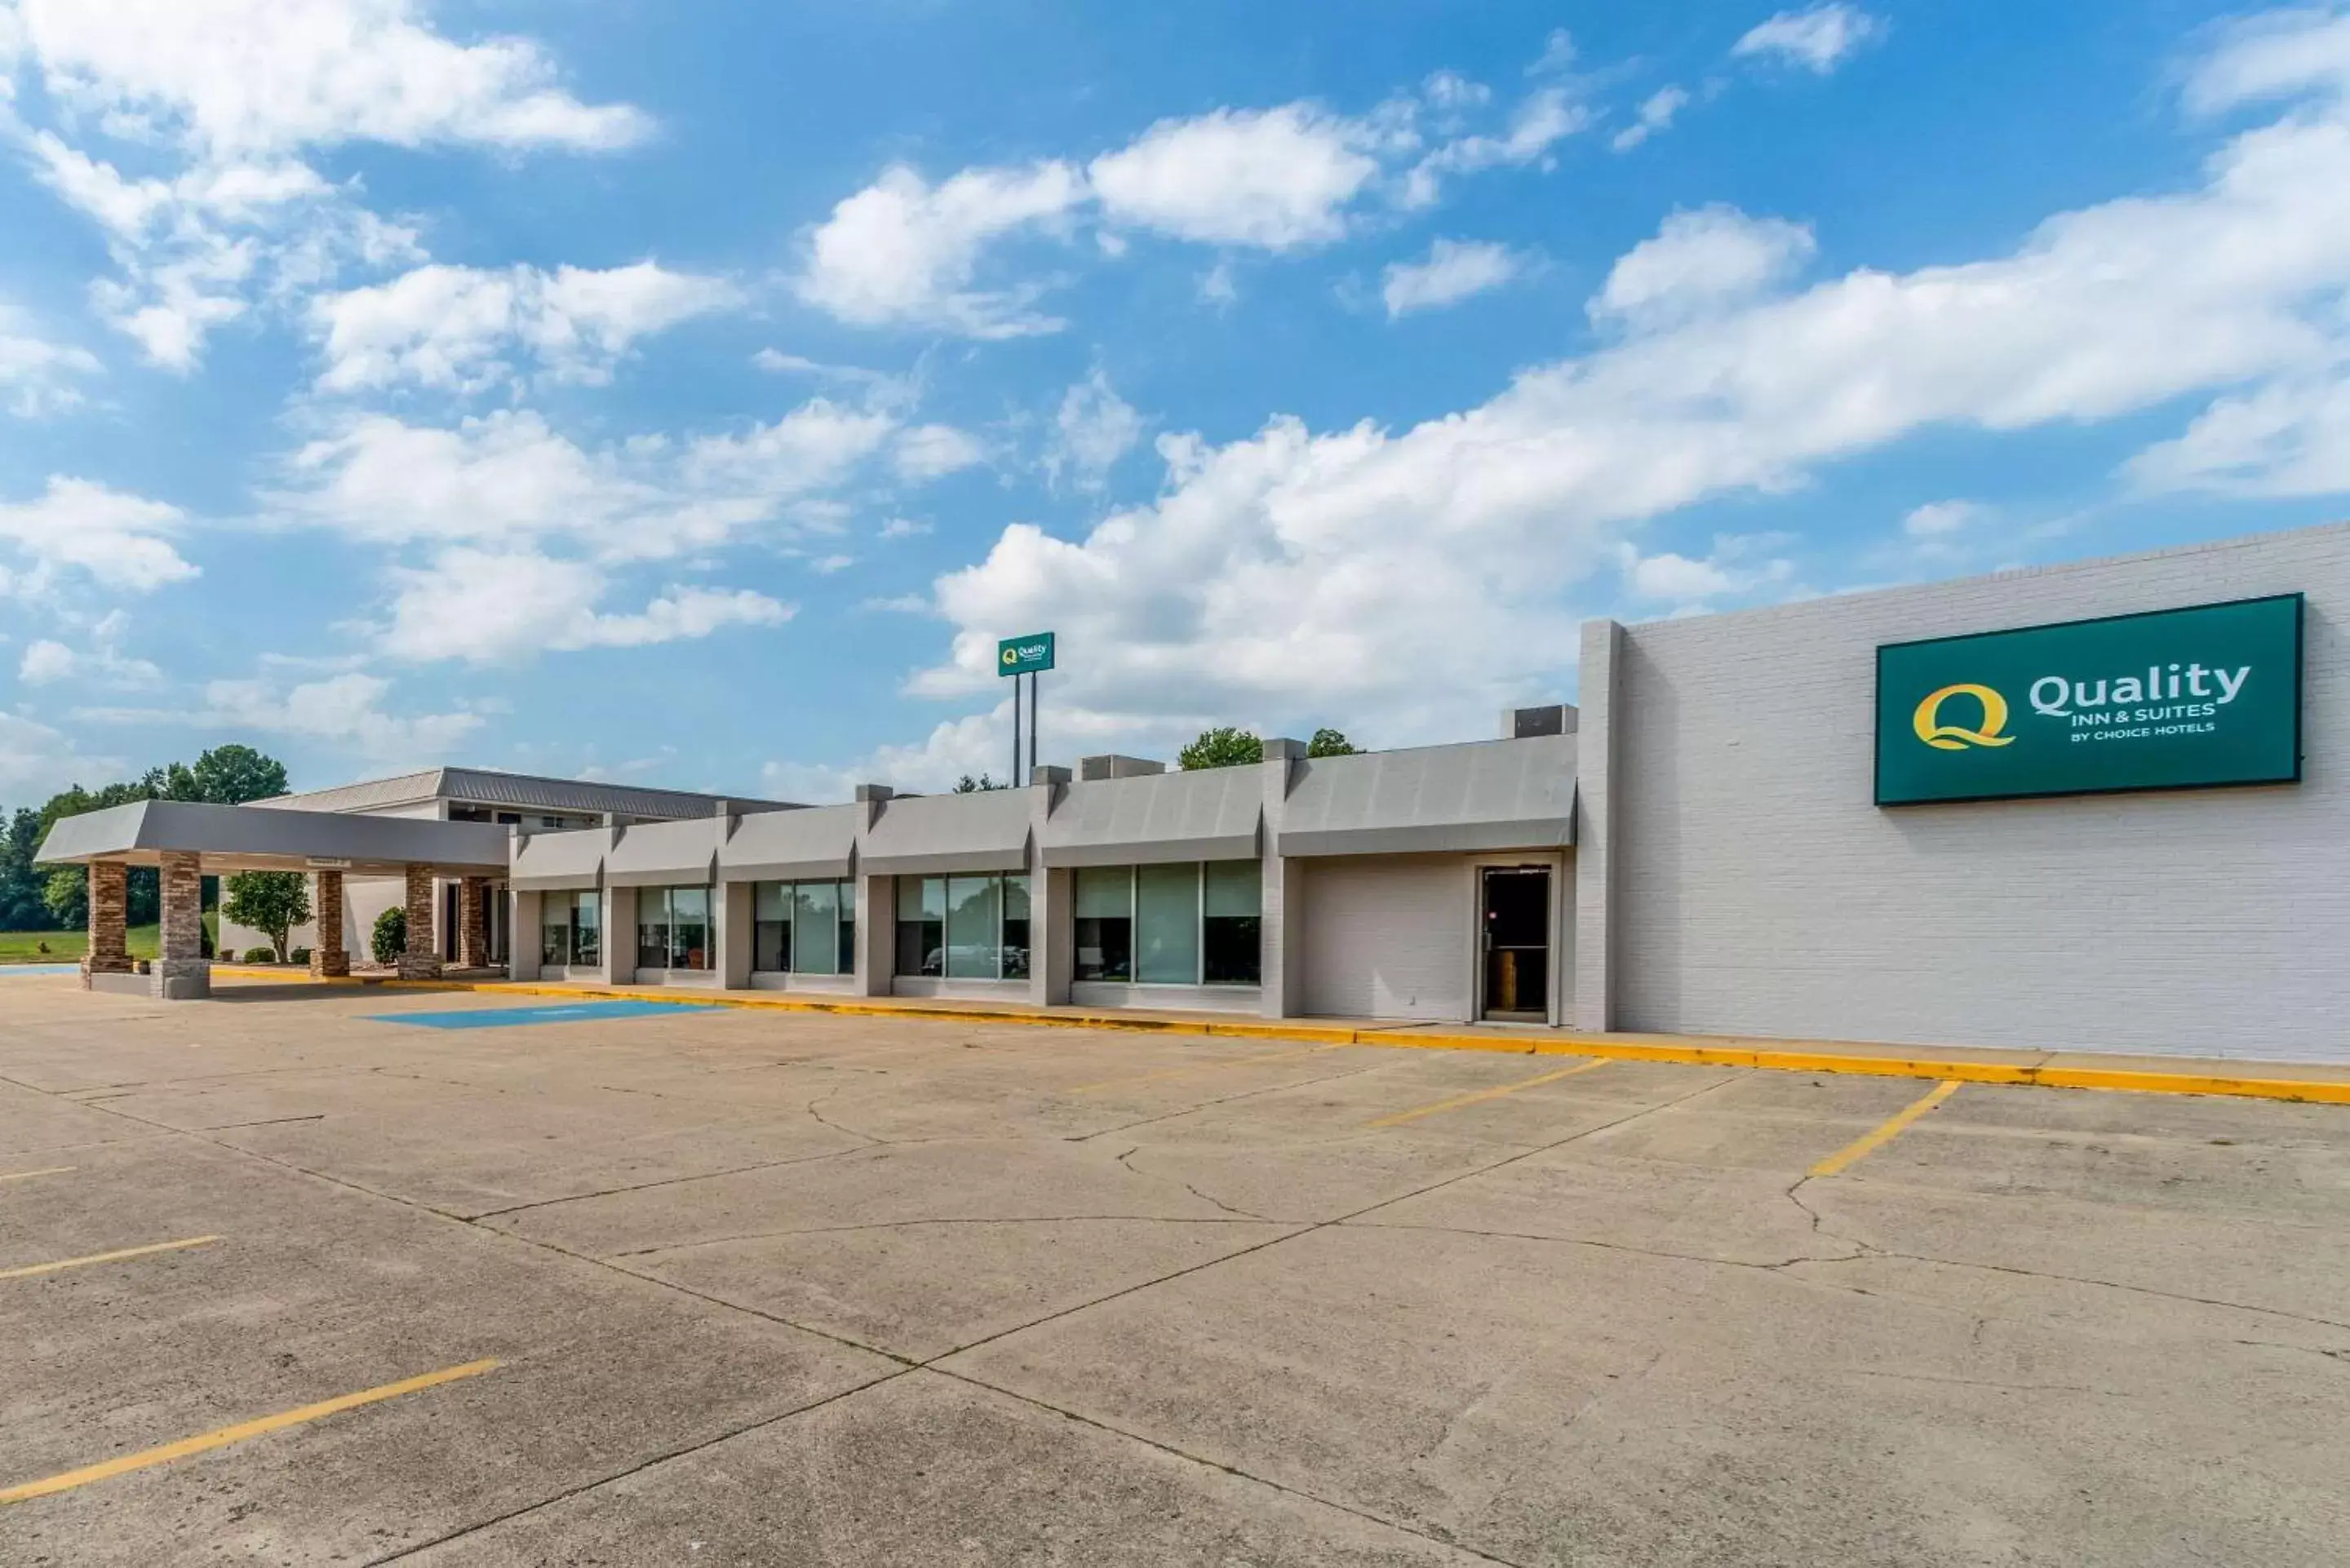 Property building in Quality Inn & Suites Vandalia near I-70 and Hwy 51